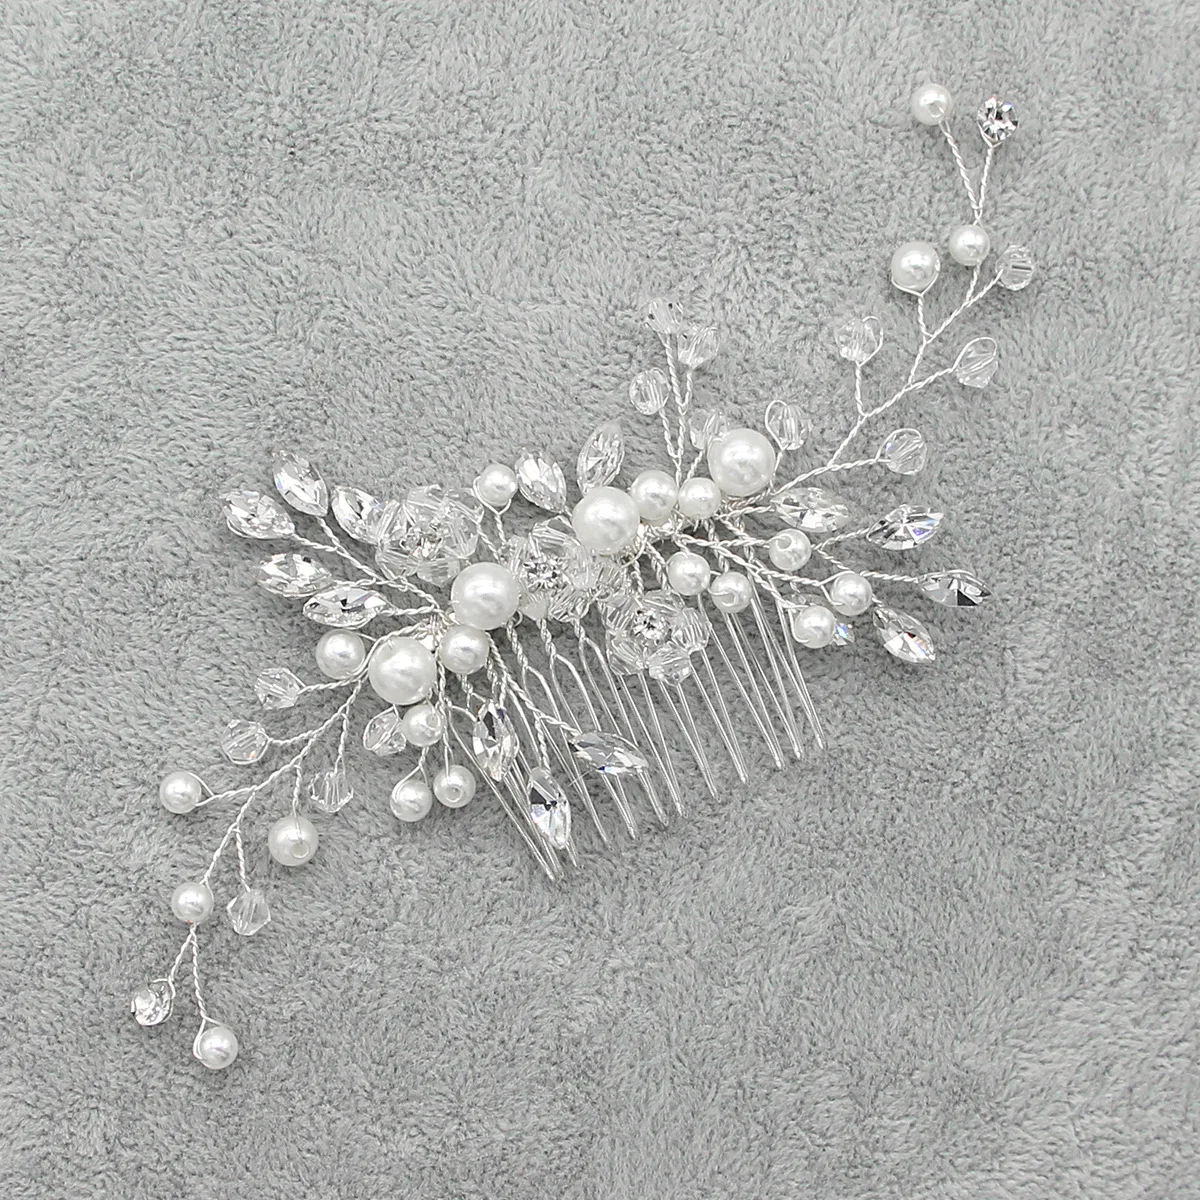 Silver Color Pearl Rhinestone Wedding Hair Combs Hair Accessories for Women Accessories Hair Ornaments Jewelry Bridal Headpiece images - 6